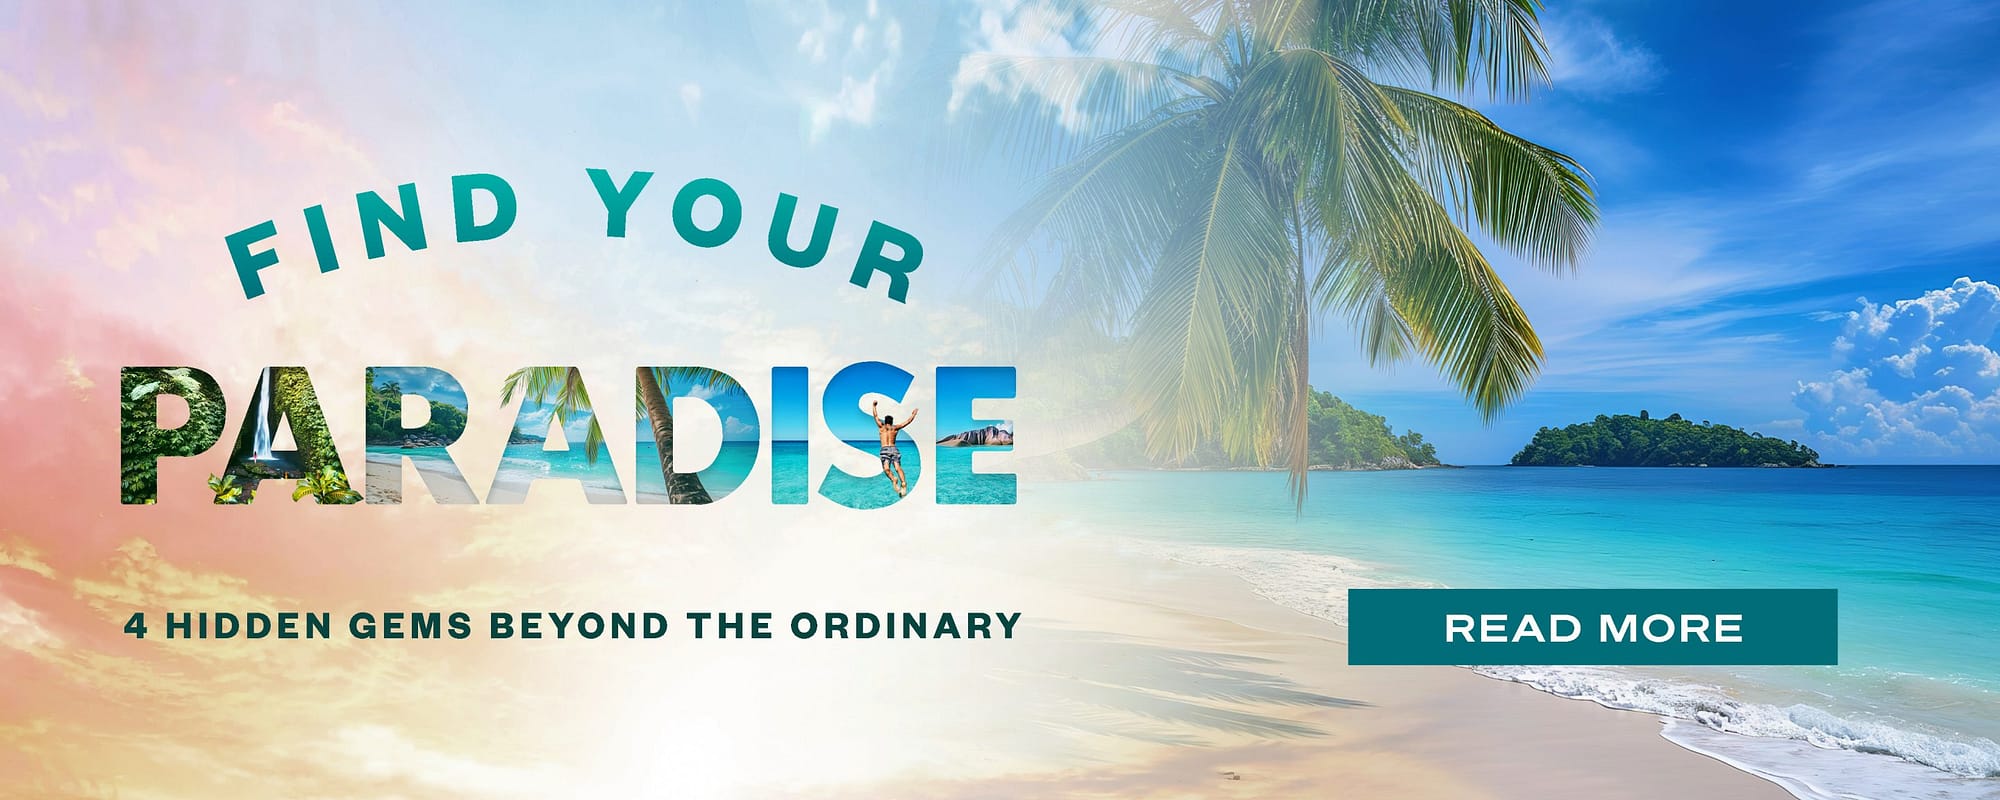 Find your paradise - discover top destinations